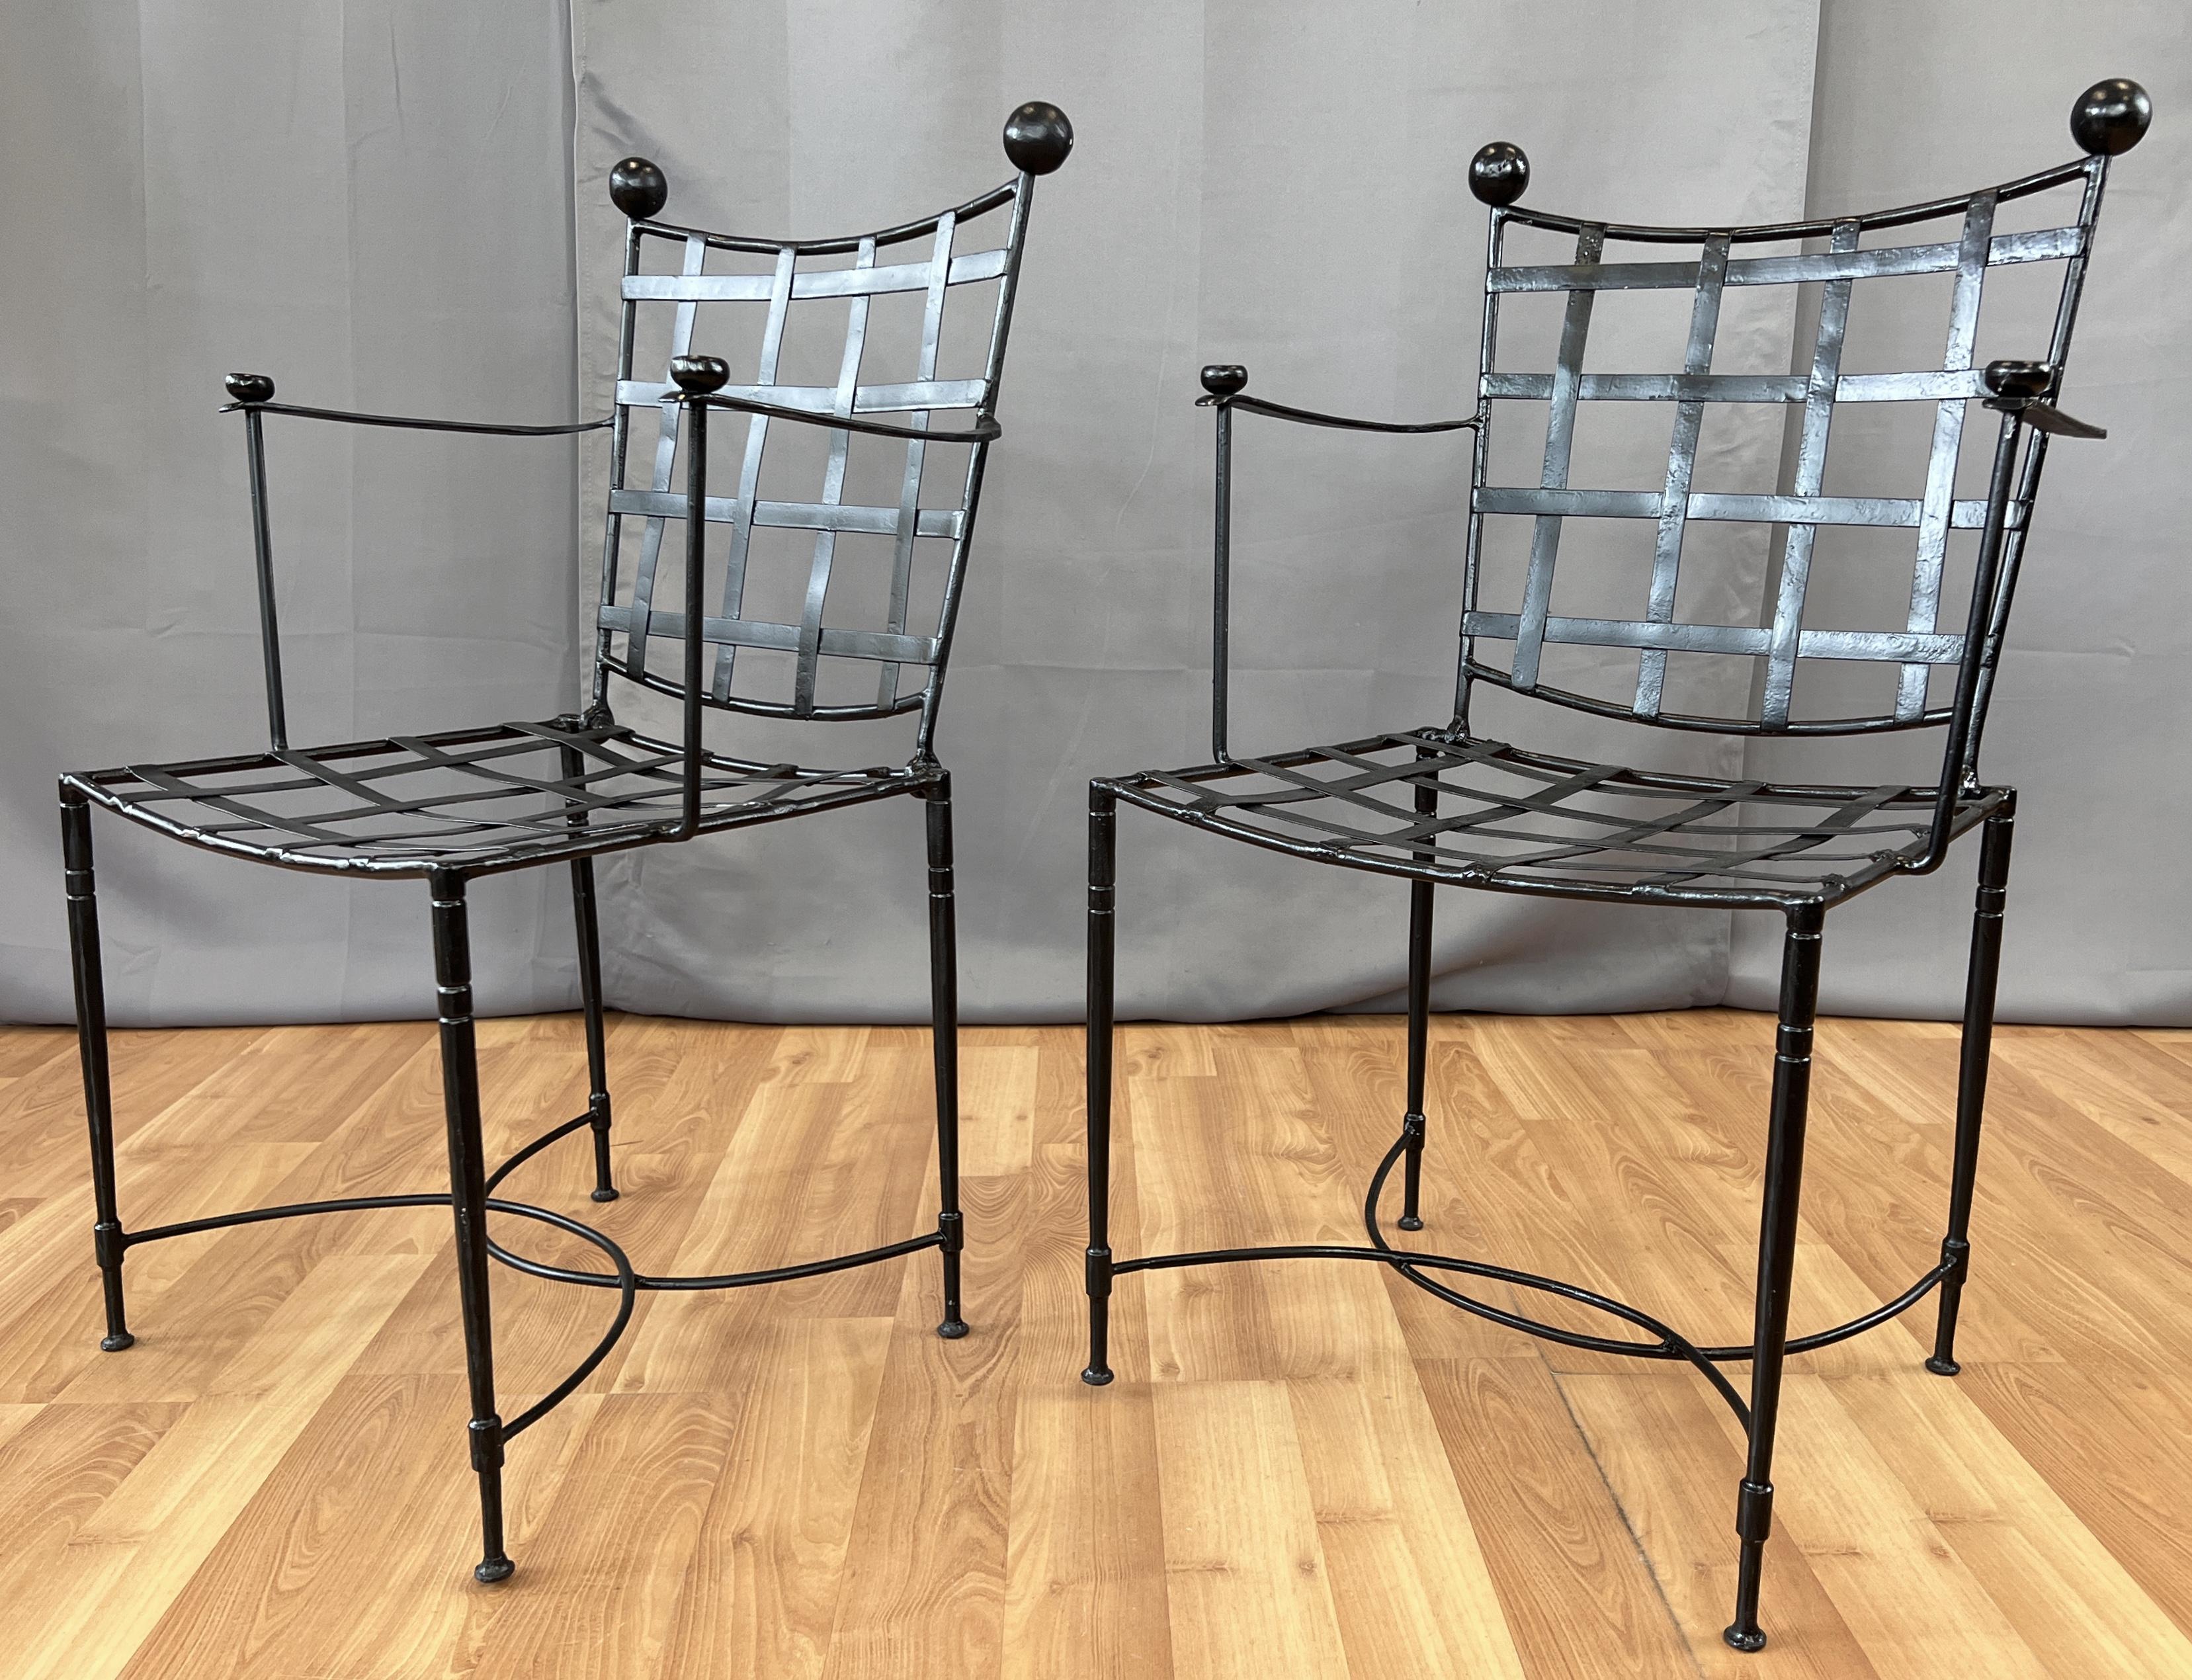 A classic pair of woven seat and back rest patio chairs that were designed by Mario Papperzini for John Salterini.
Four slender legs connected to each other with two U shape braces, which those in turn hold the woven seats and backs.
At the ends of